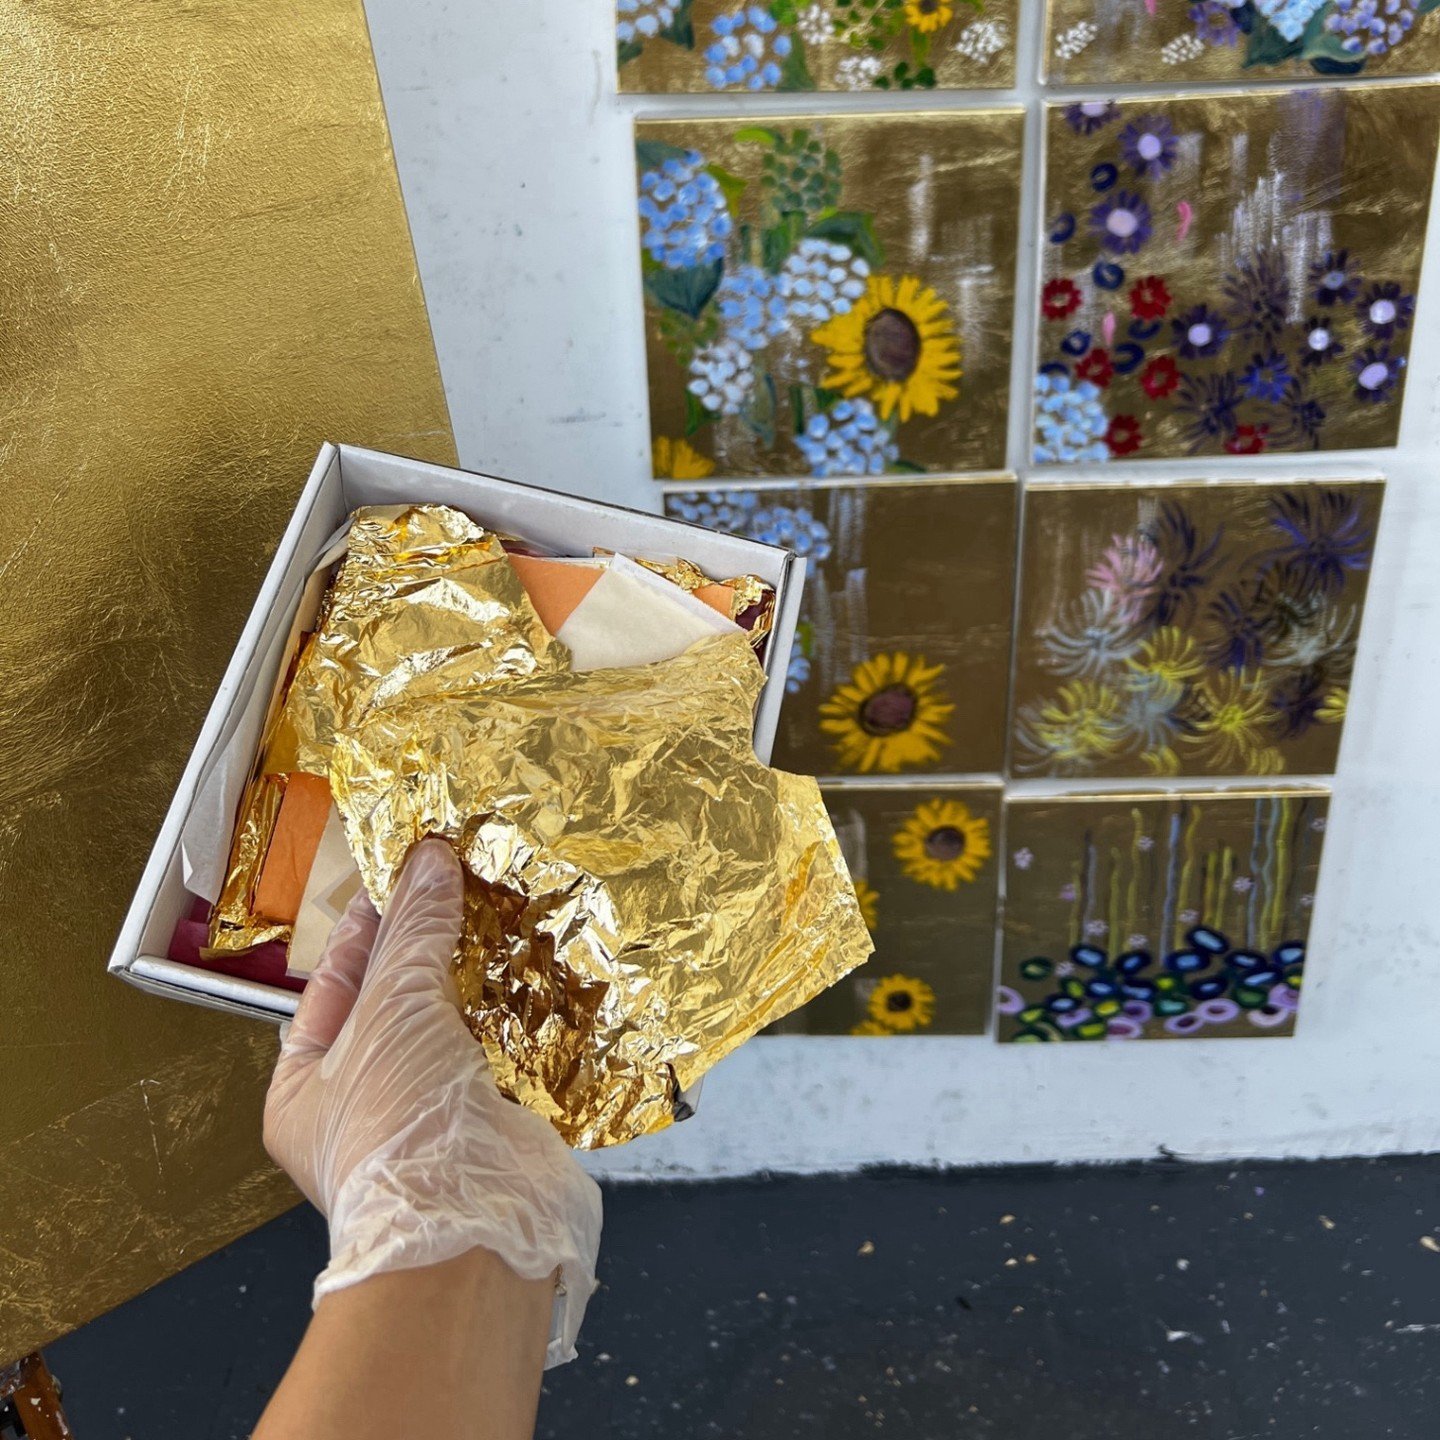 Painting with gold and silver leaf adds texture and a layer of brilliance to my work 💛🩶✨

Have you ever wanted to learn how to apply metal leaf? Let me know below!